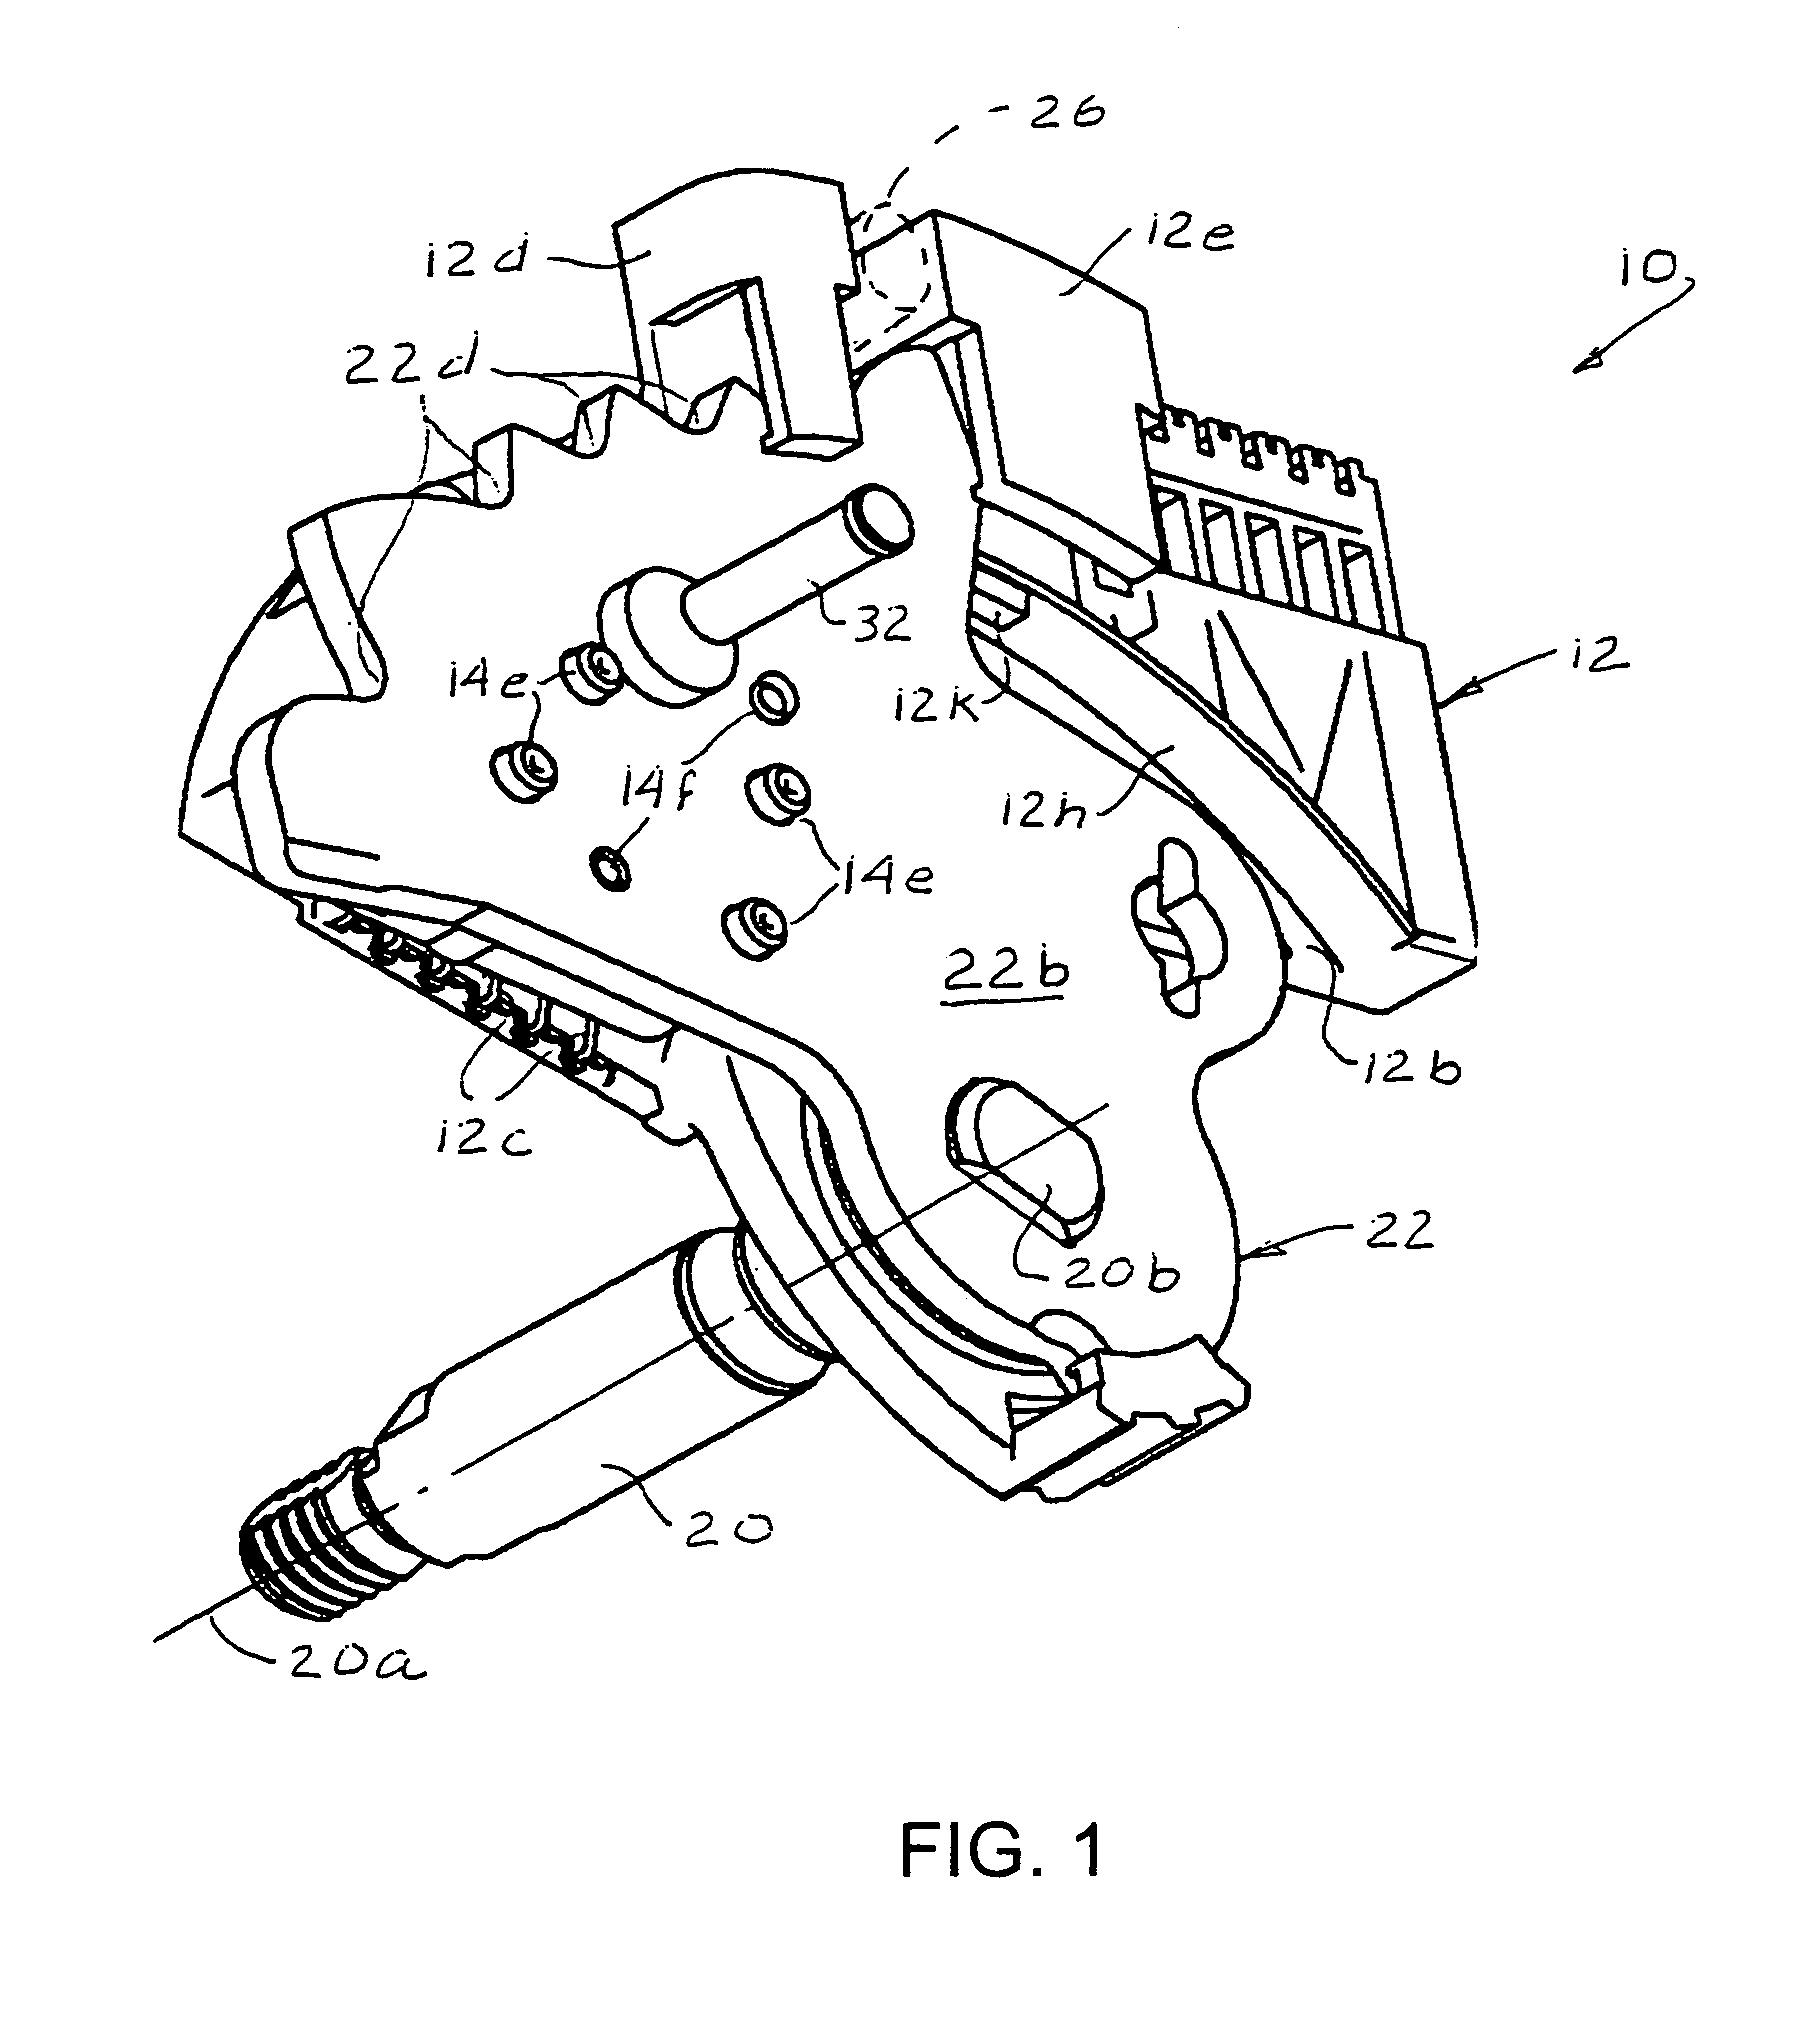 Electrical switch system responsive to gear selection of vehicular transmission